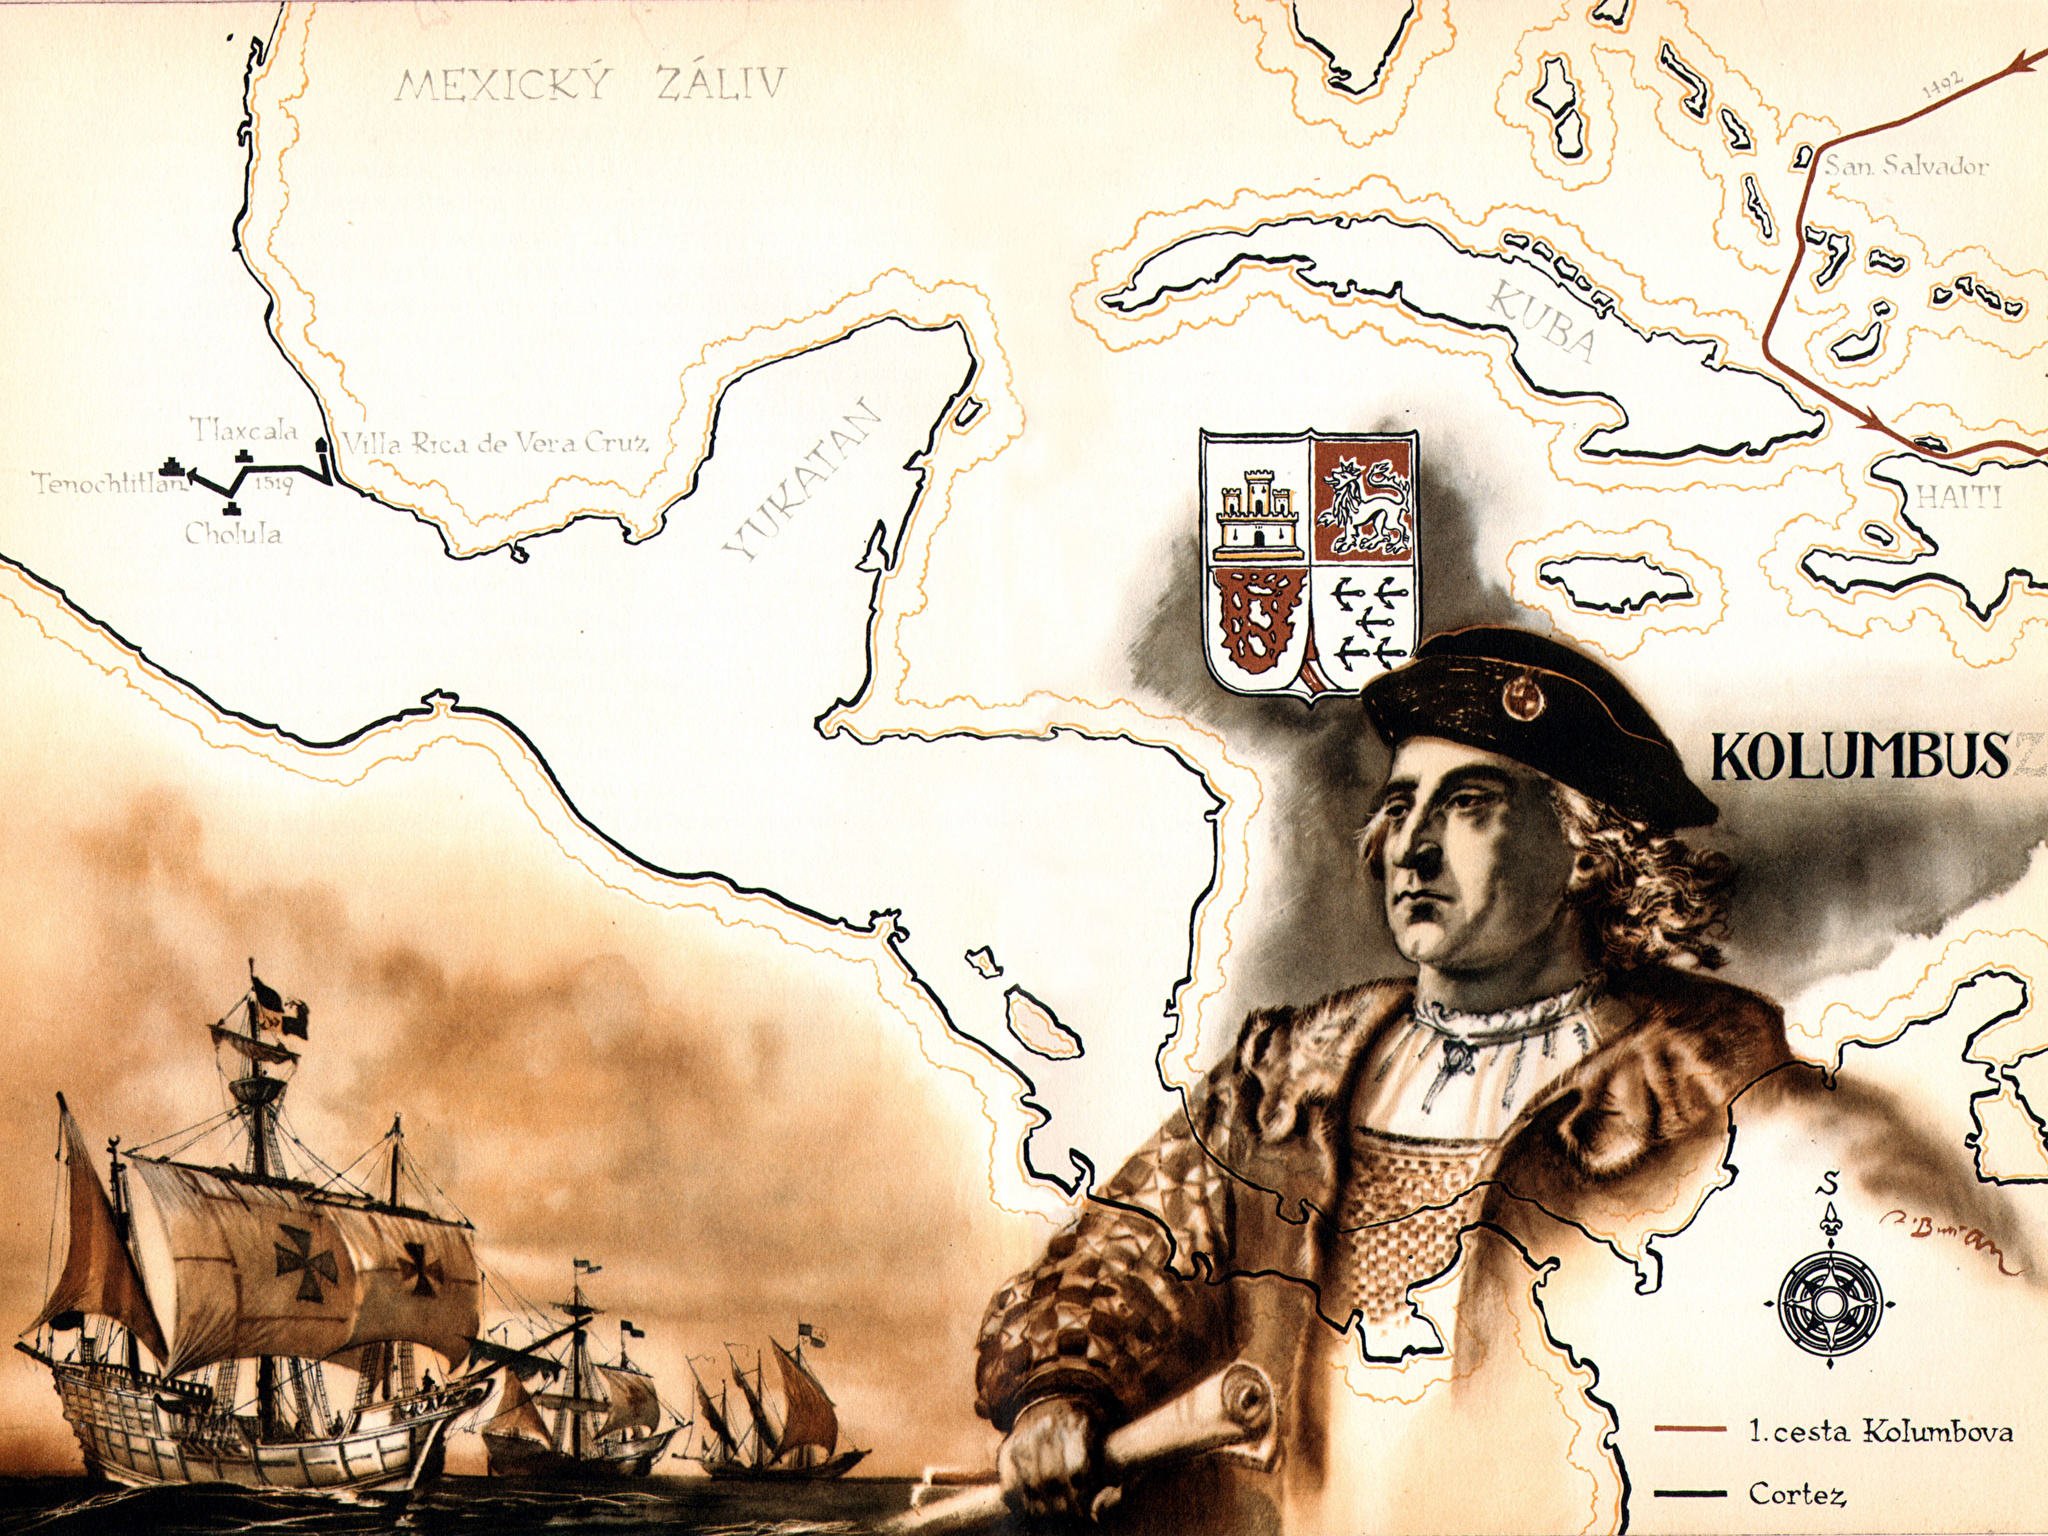 [28+] christopher columbus wallpapers on wallpapersafari on christopher columbus wallpapers